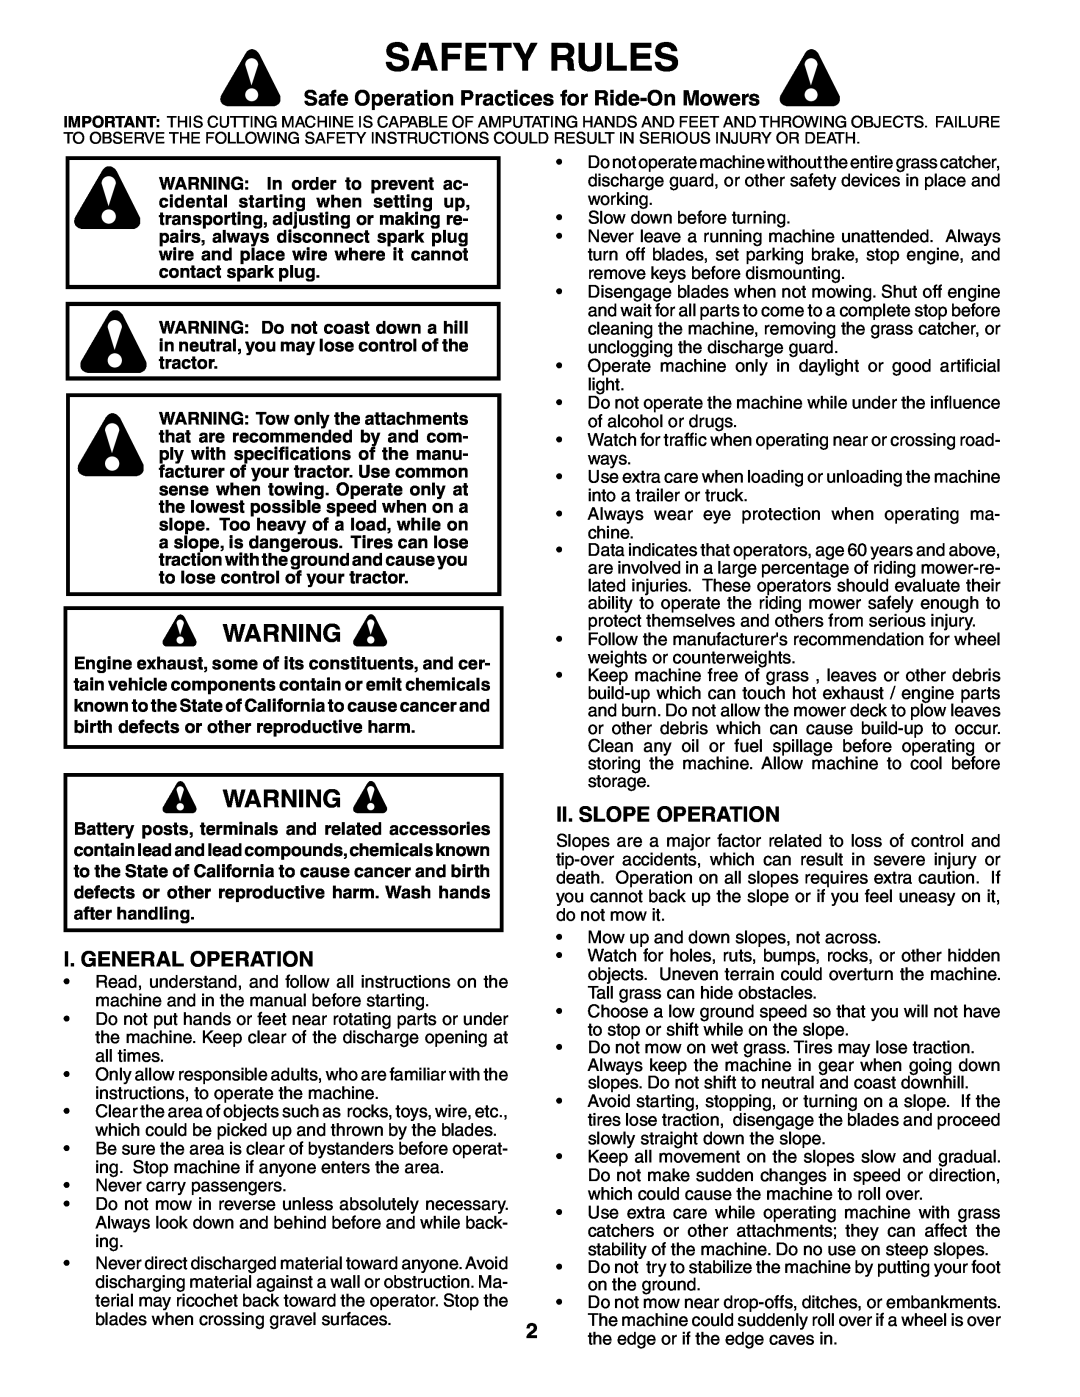 Poulan 194632 manual Safety Rules, Safe Operation Practices for Ride-On Mowers, I. General Operation, Ii. Slope Operation 